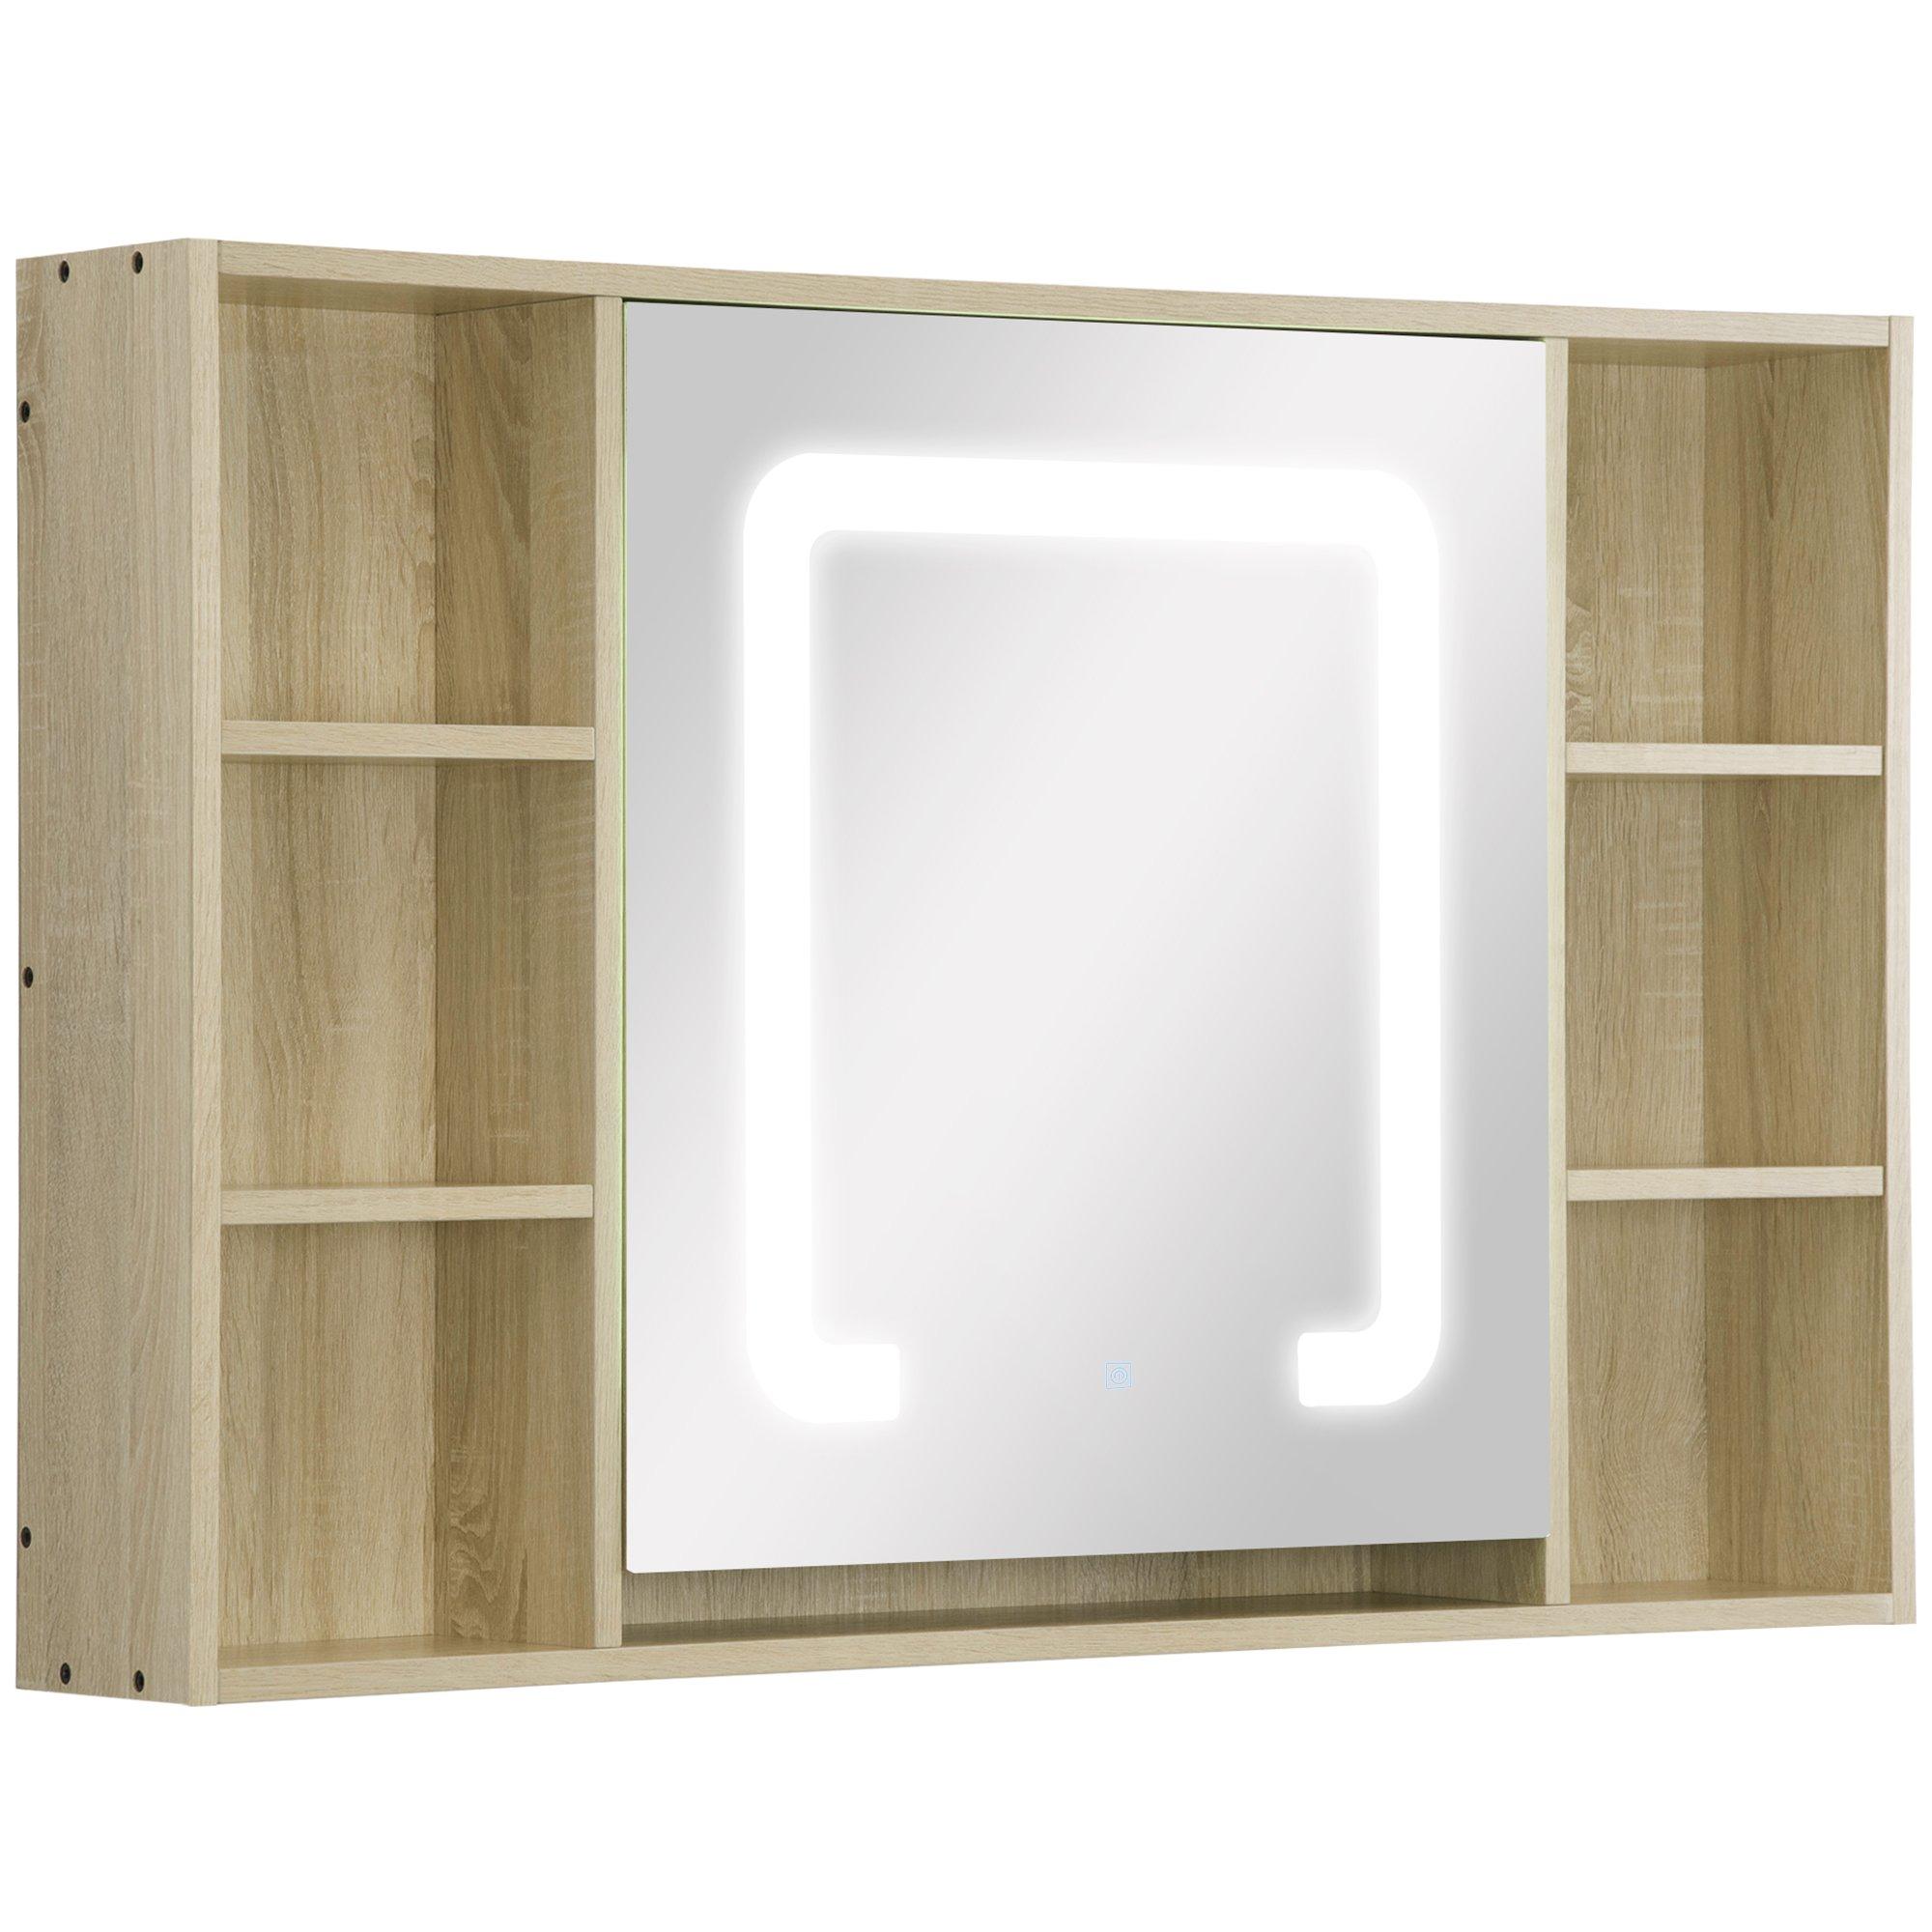 LED Dimmable Bathroom Cabinet Wall Mounted Mirrored Door Shelves